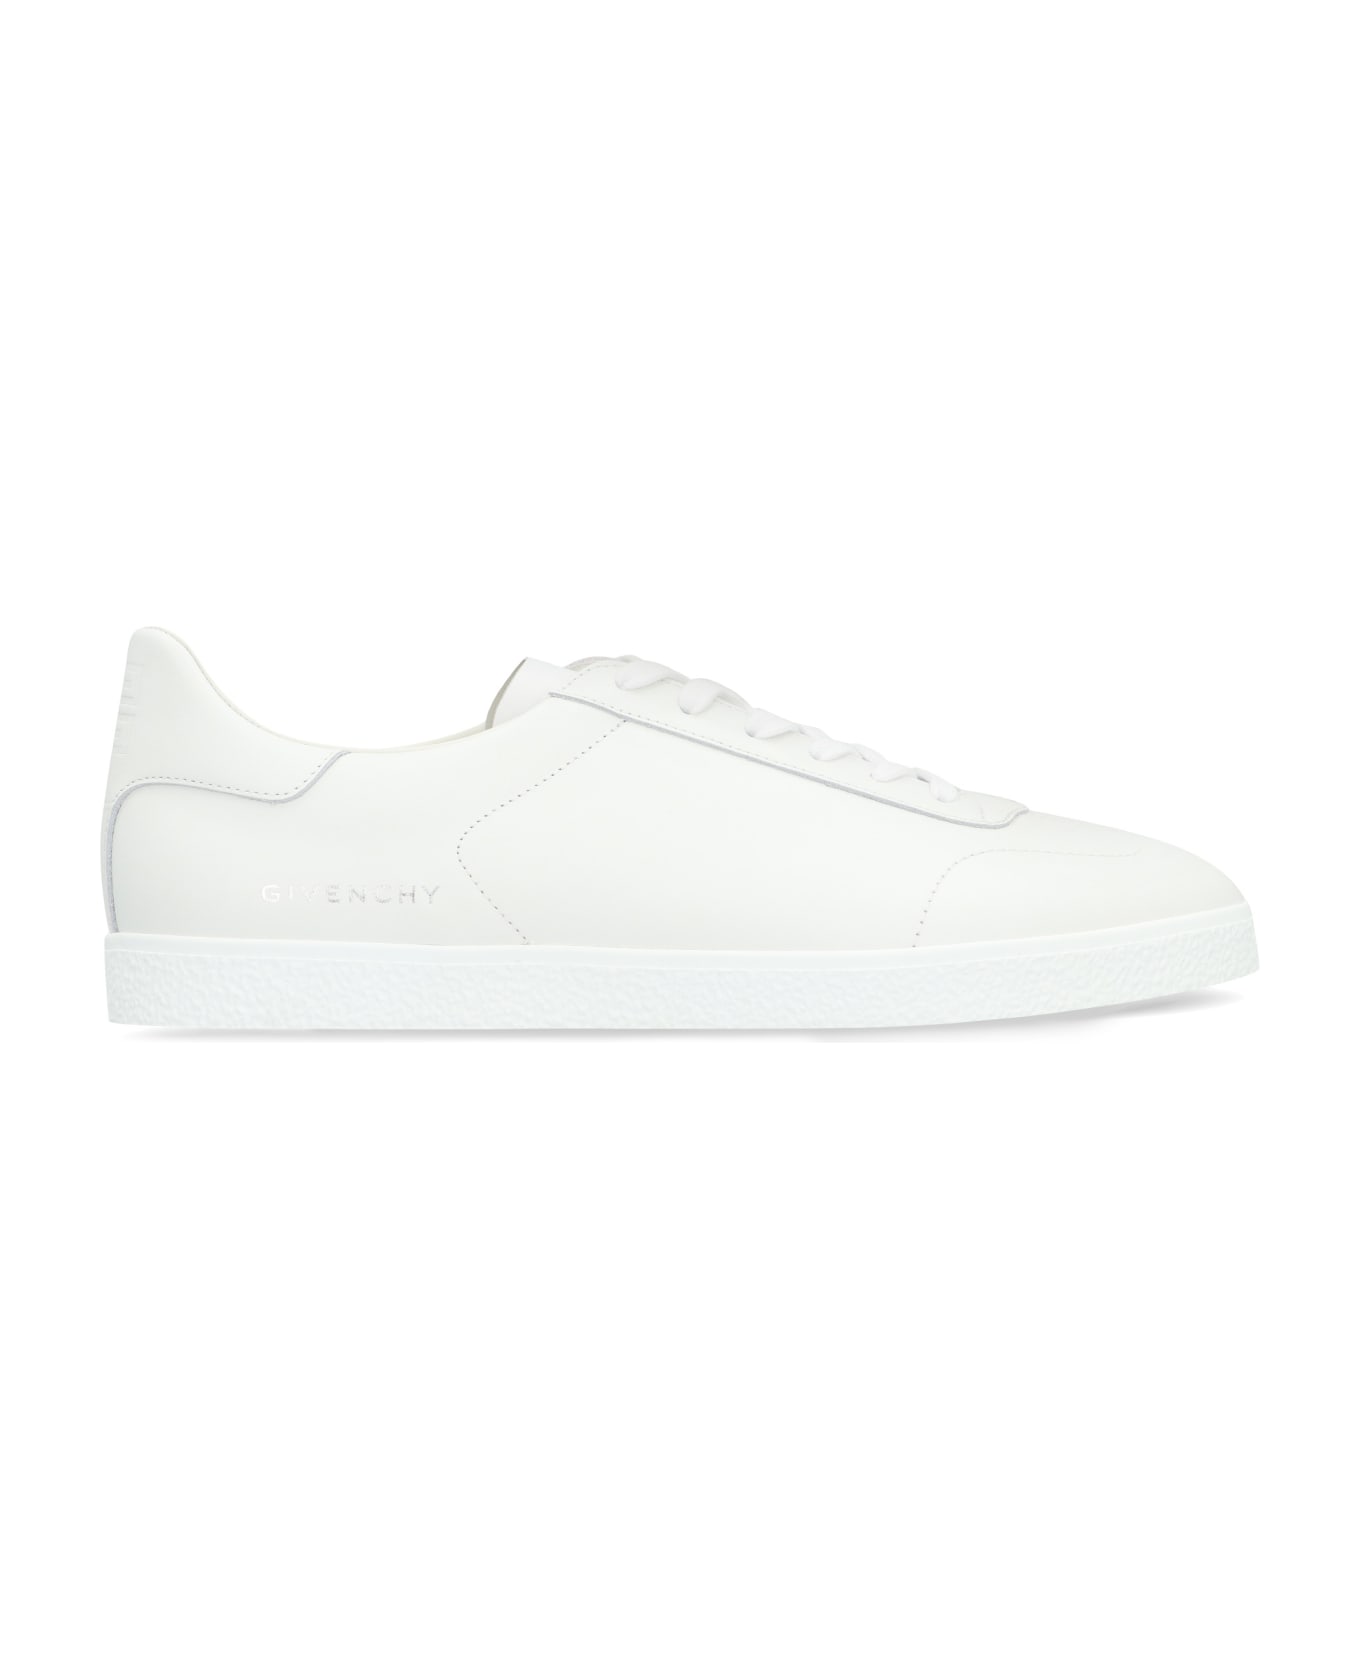 Givenchy Town Leather Low-top Sneakers - White